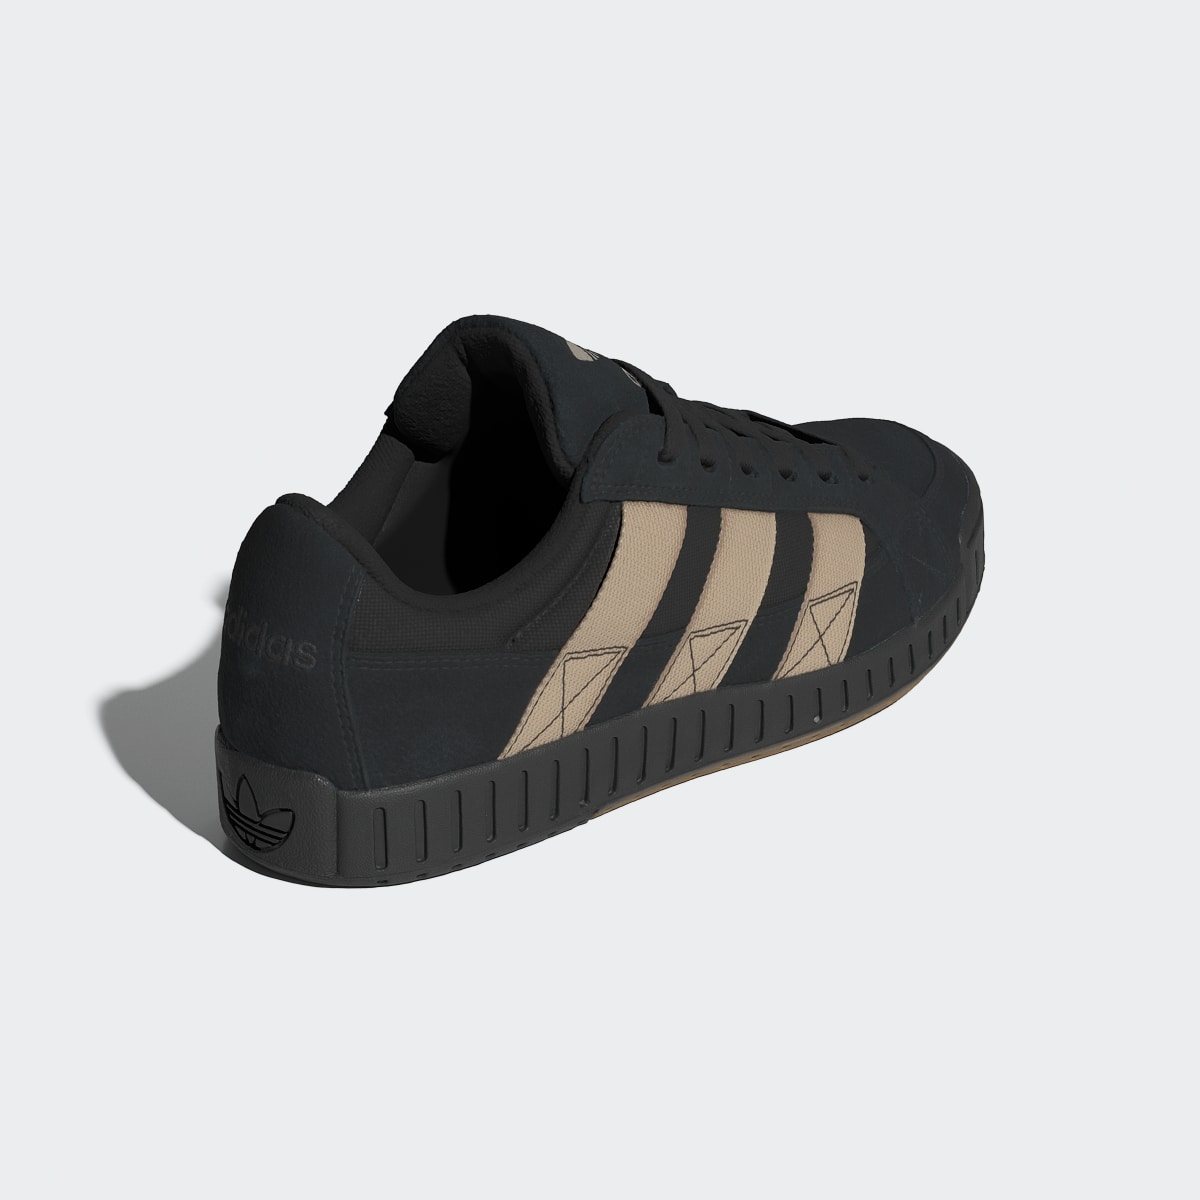 Adidas LWST Shoes. 6